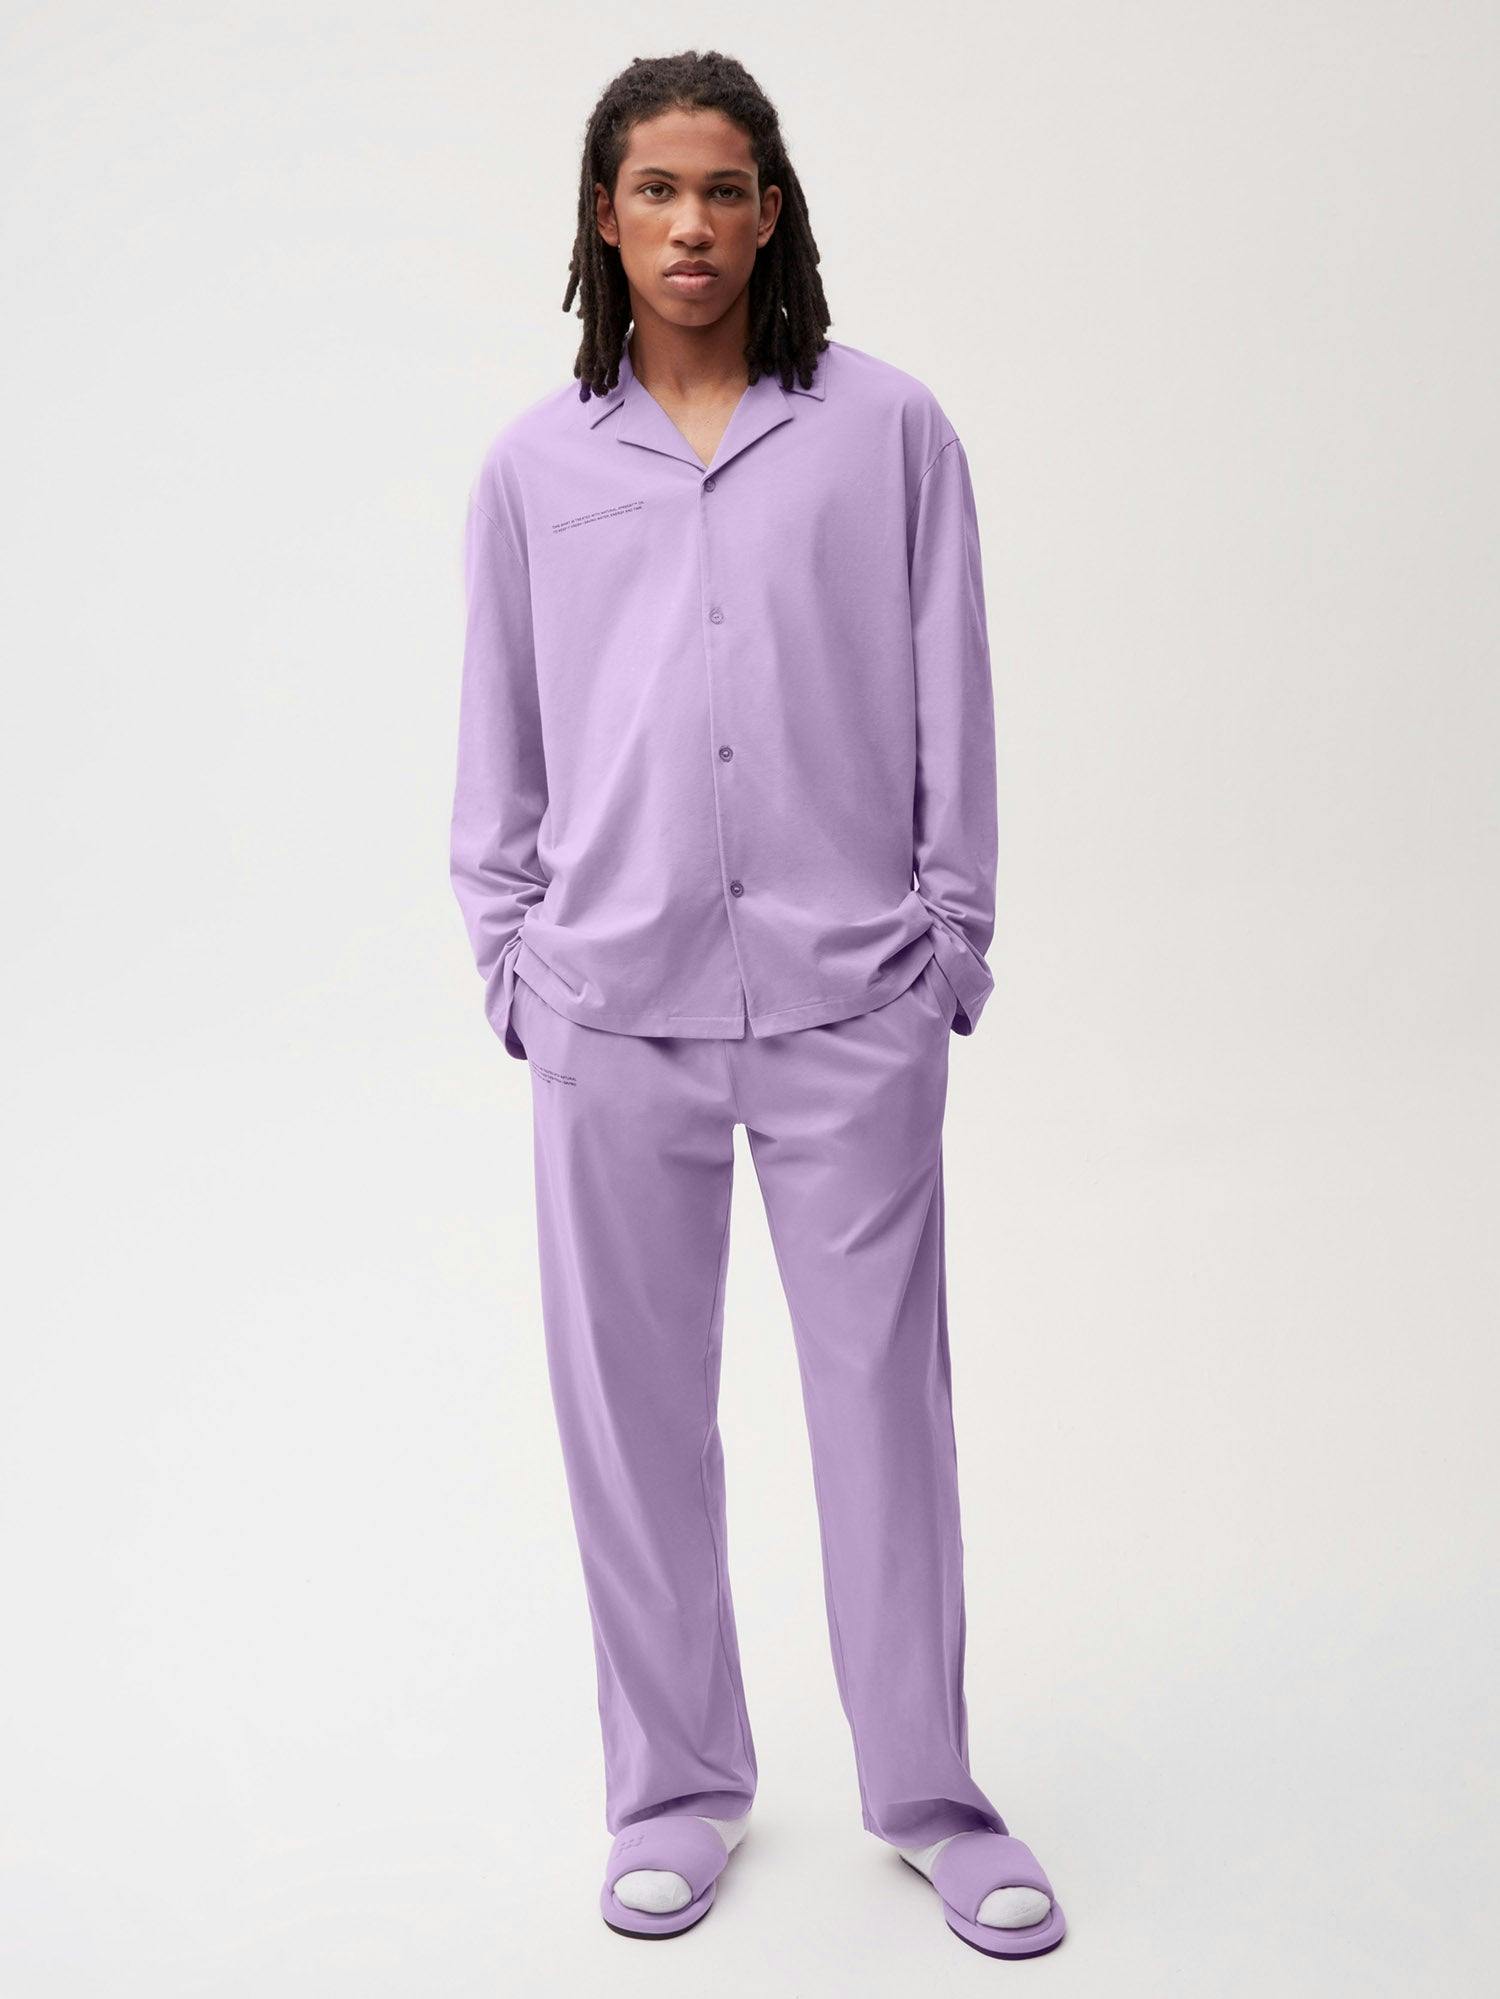 https://cdn.shopify.com/s/files/1/0035/1309/0115/products/Organic-Cotton-Pajama-Loose-Pant-Orchid-Purple-Male-1.jpg?v=1662476129